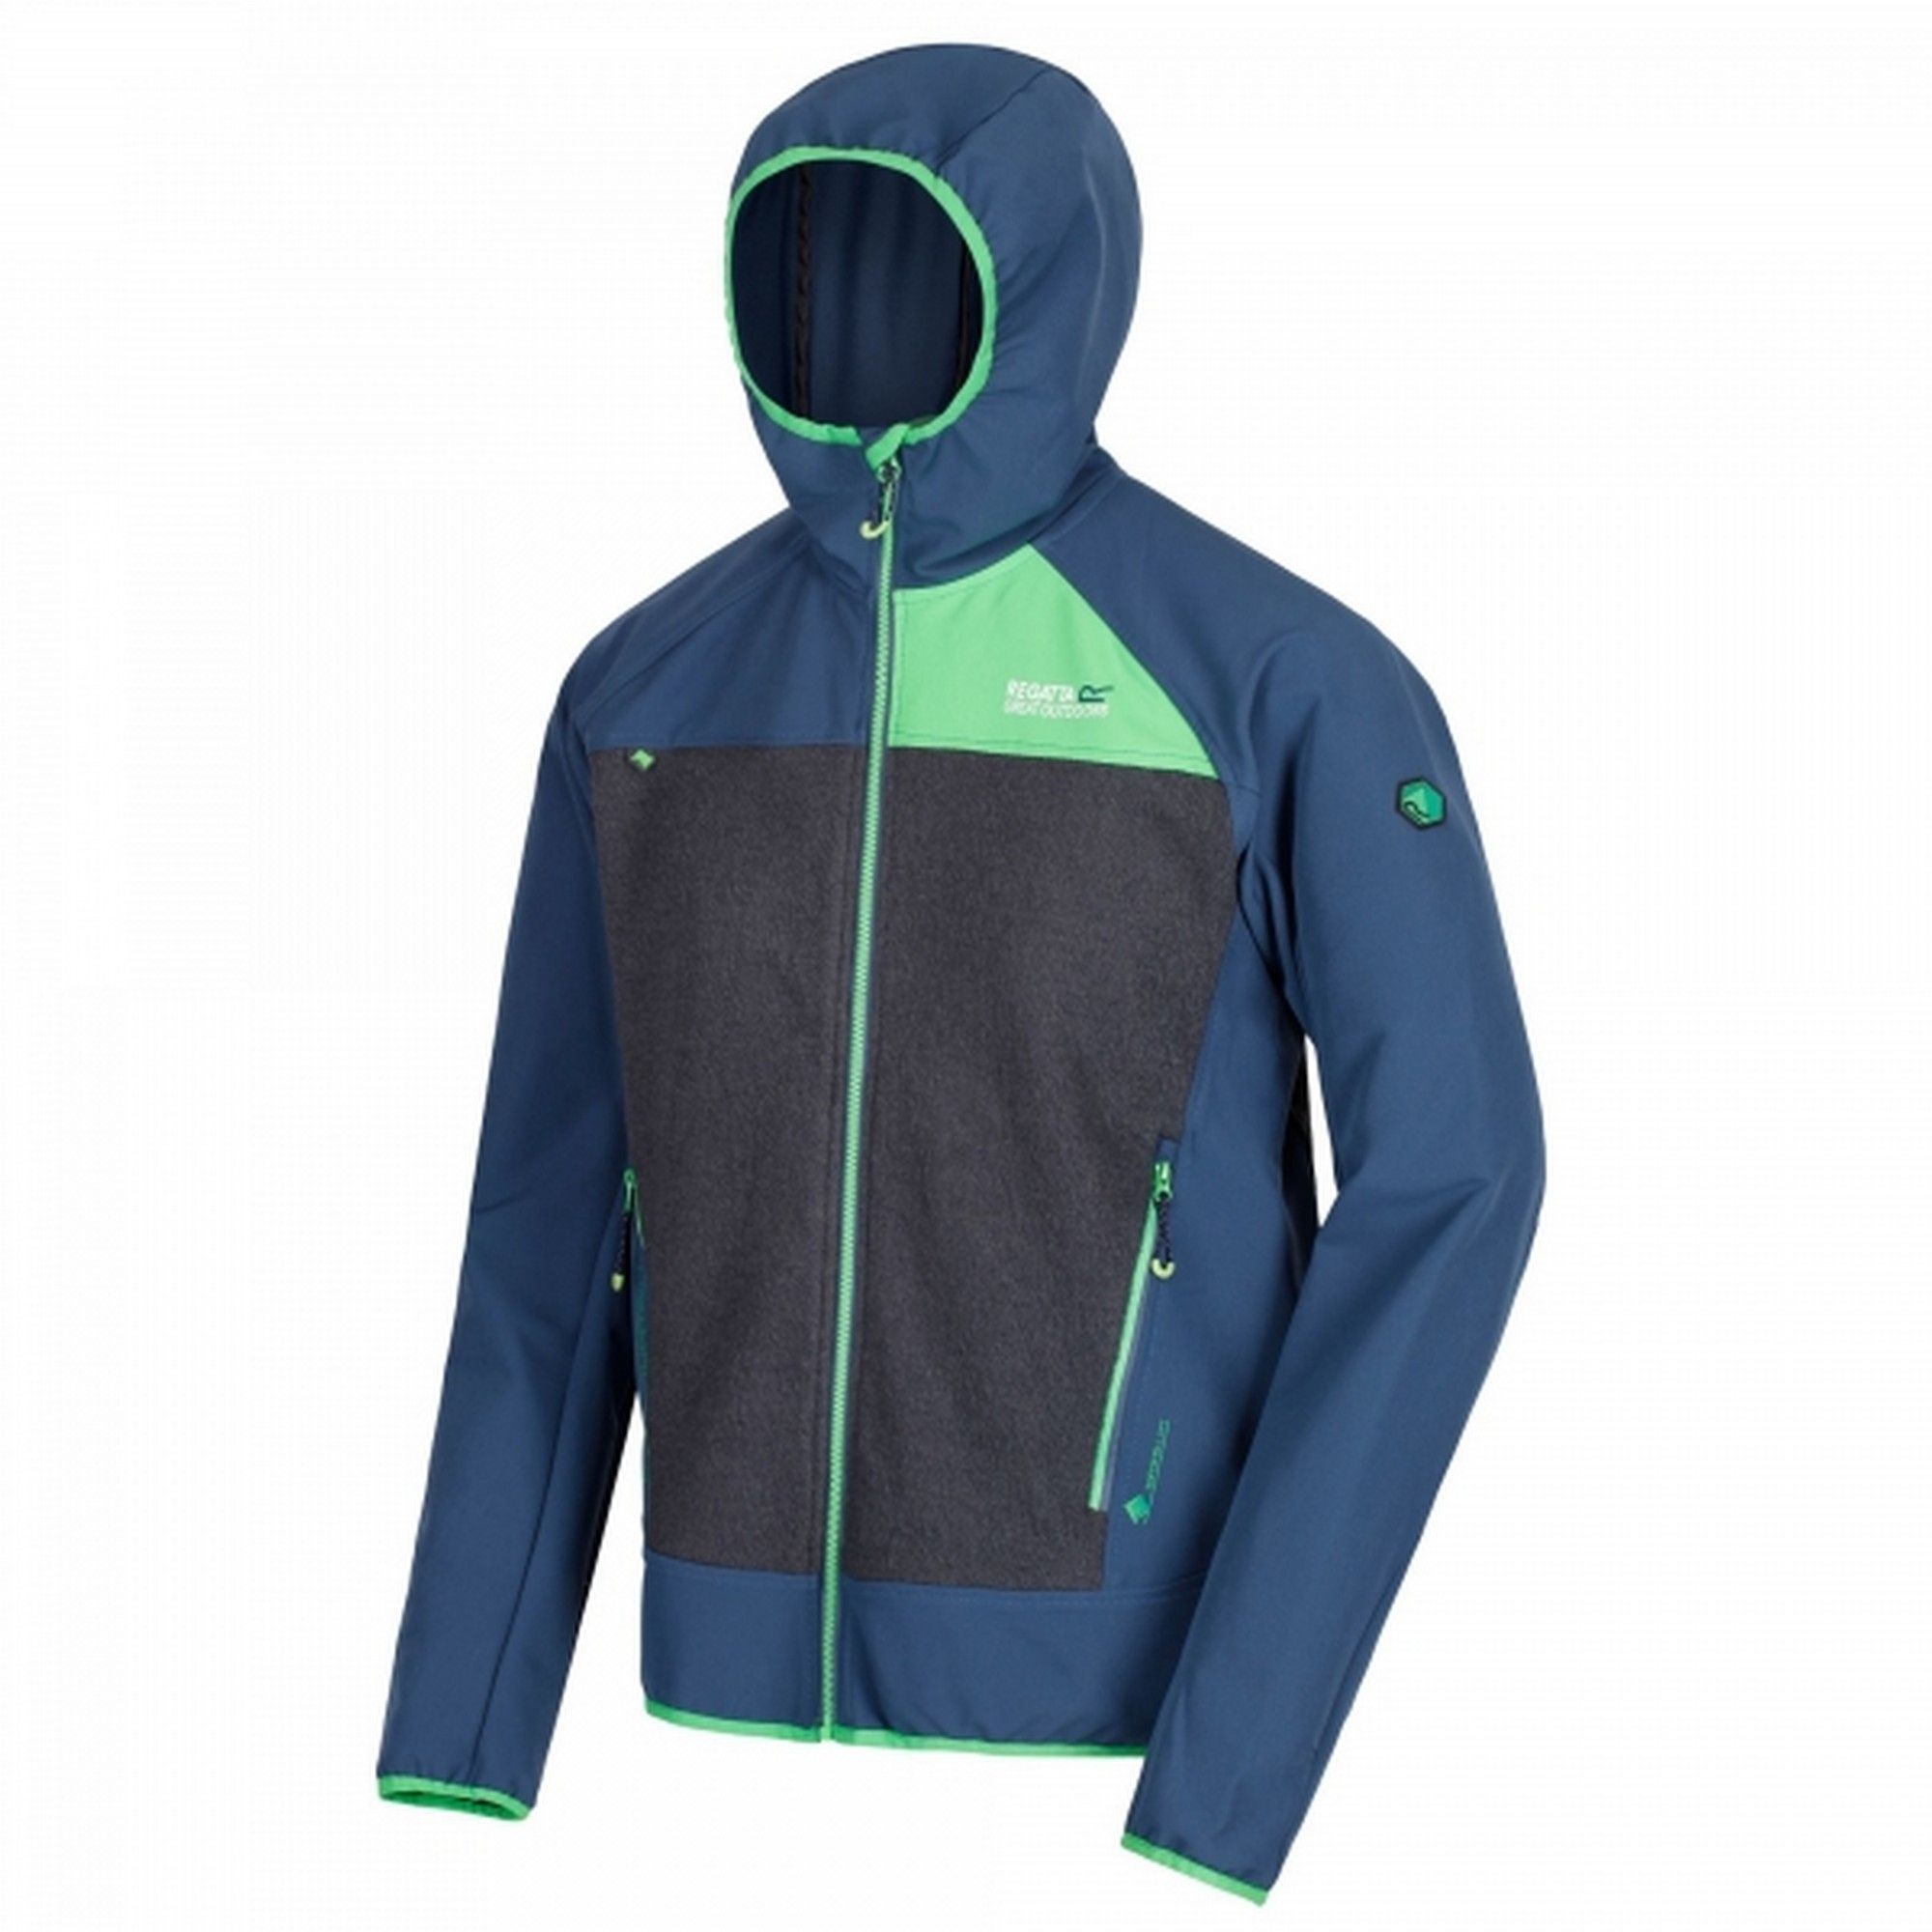 Mens hooded jacket made of Isoflex active stretch fabric. Wool mix panels to the body. Wind resistant. Grown on hood. 2 zipped lower pockets. Stretch binding to hood opening, cuffs, and hem. Ideal for wearing outdoors on a cold day. 5% Elastane, 95% Polyester.